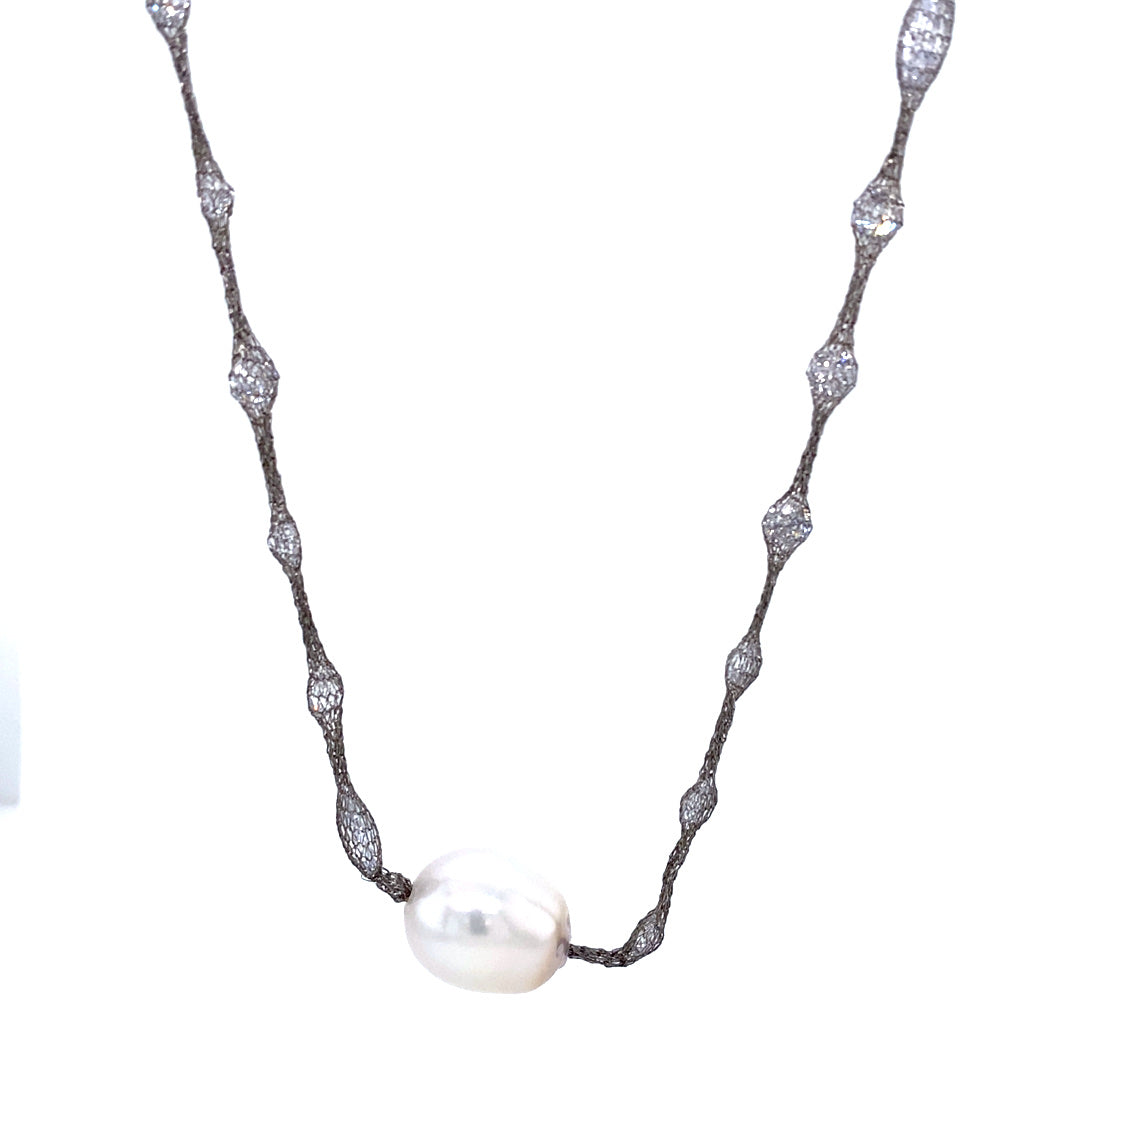 White Pearls & Cubic Zirconia Silver Mesh Long Necklace | Antipodes Pearl | Luby 